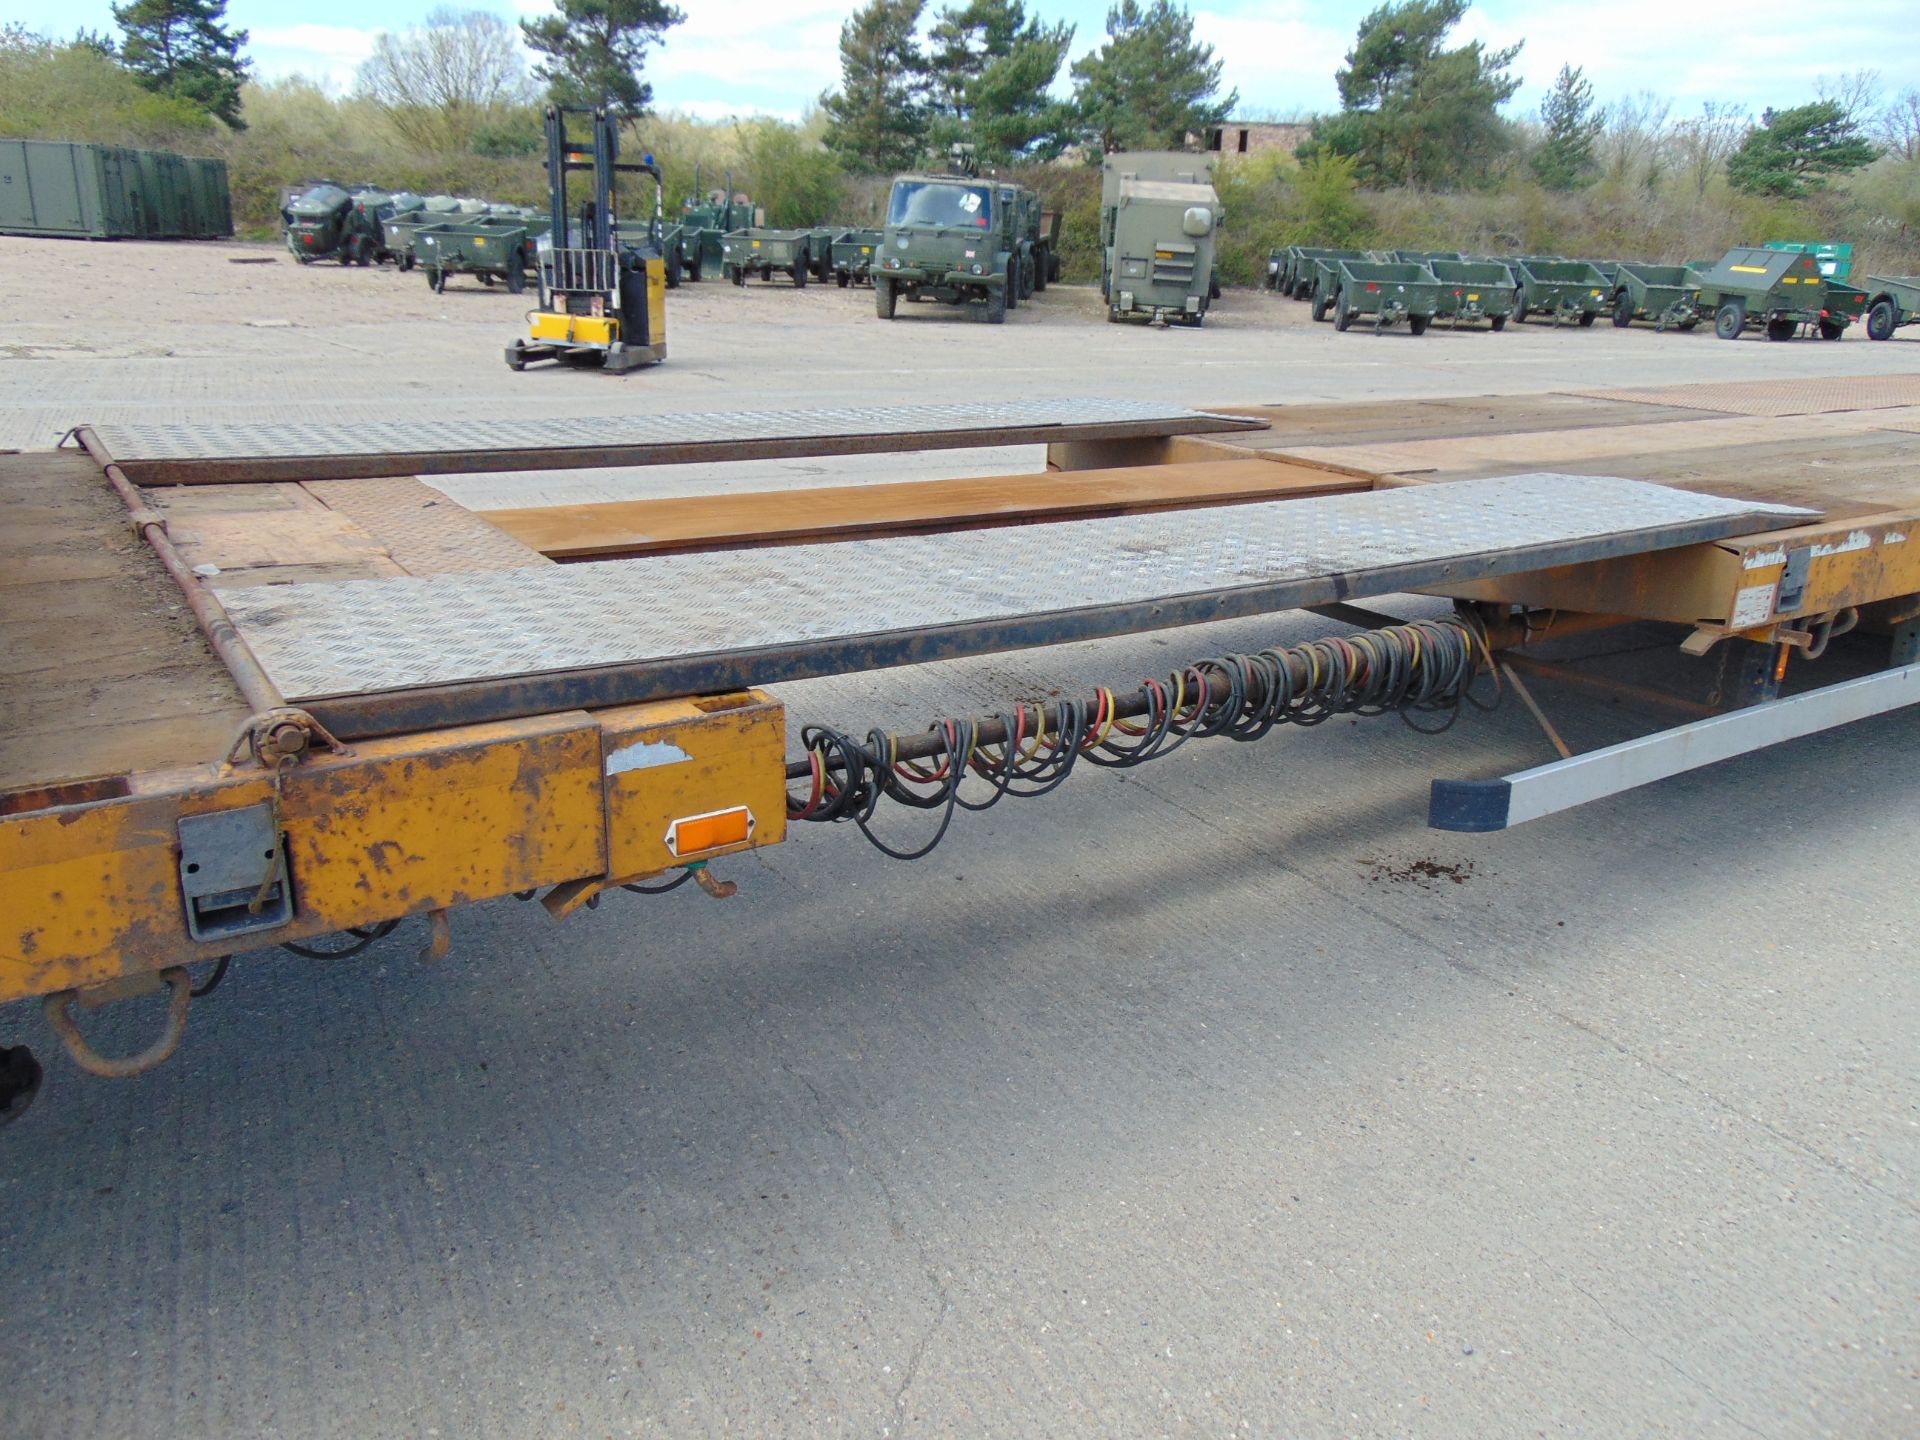 2007 Nooteboom OSDS 48-03V Extendable Tri Axle Low Loader Trailer - Image 16 of 30